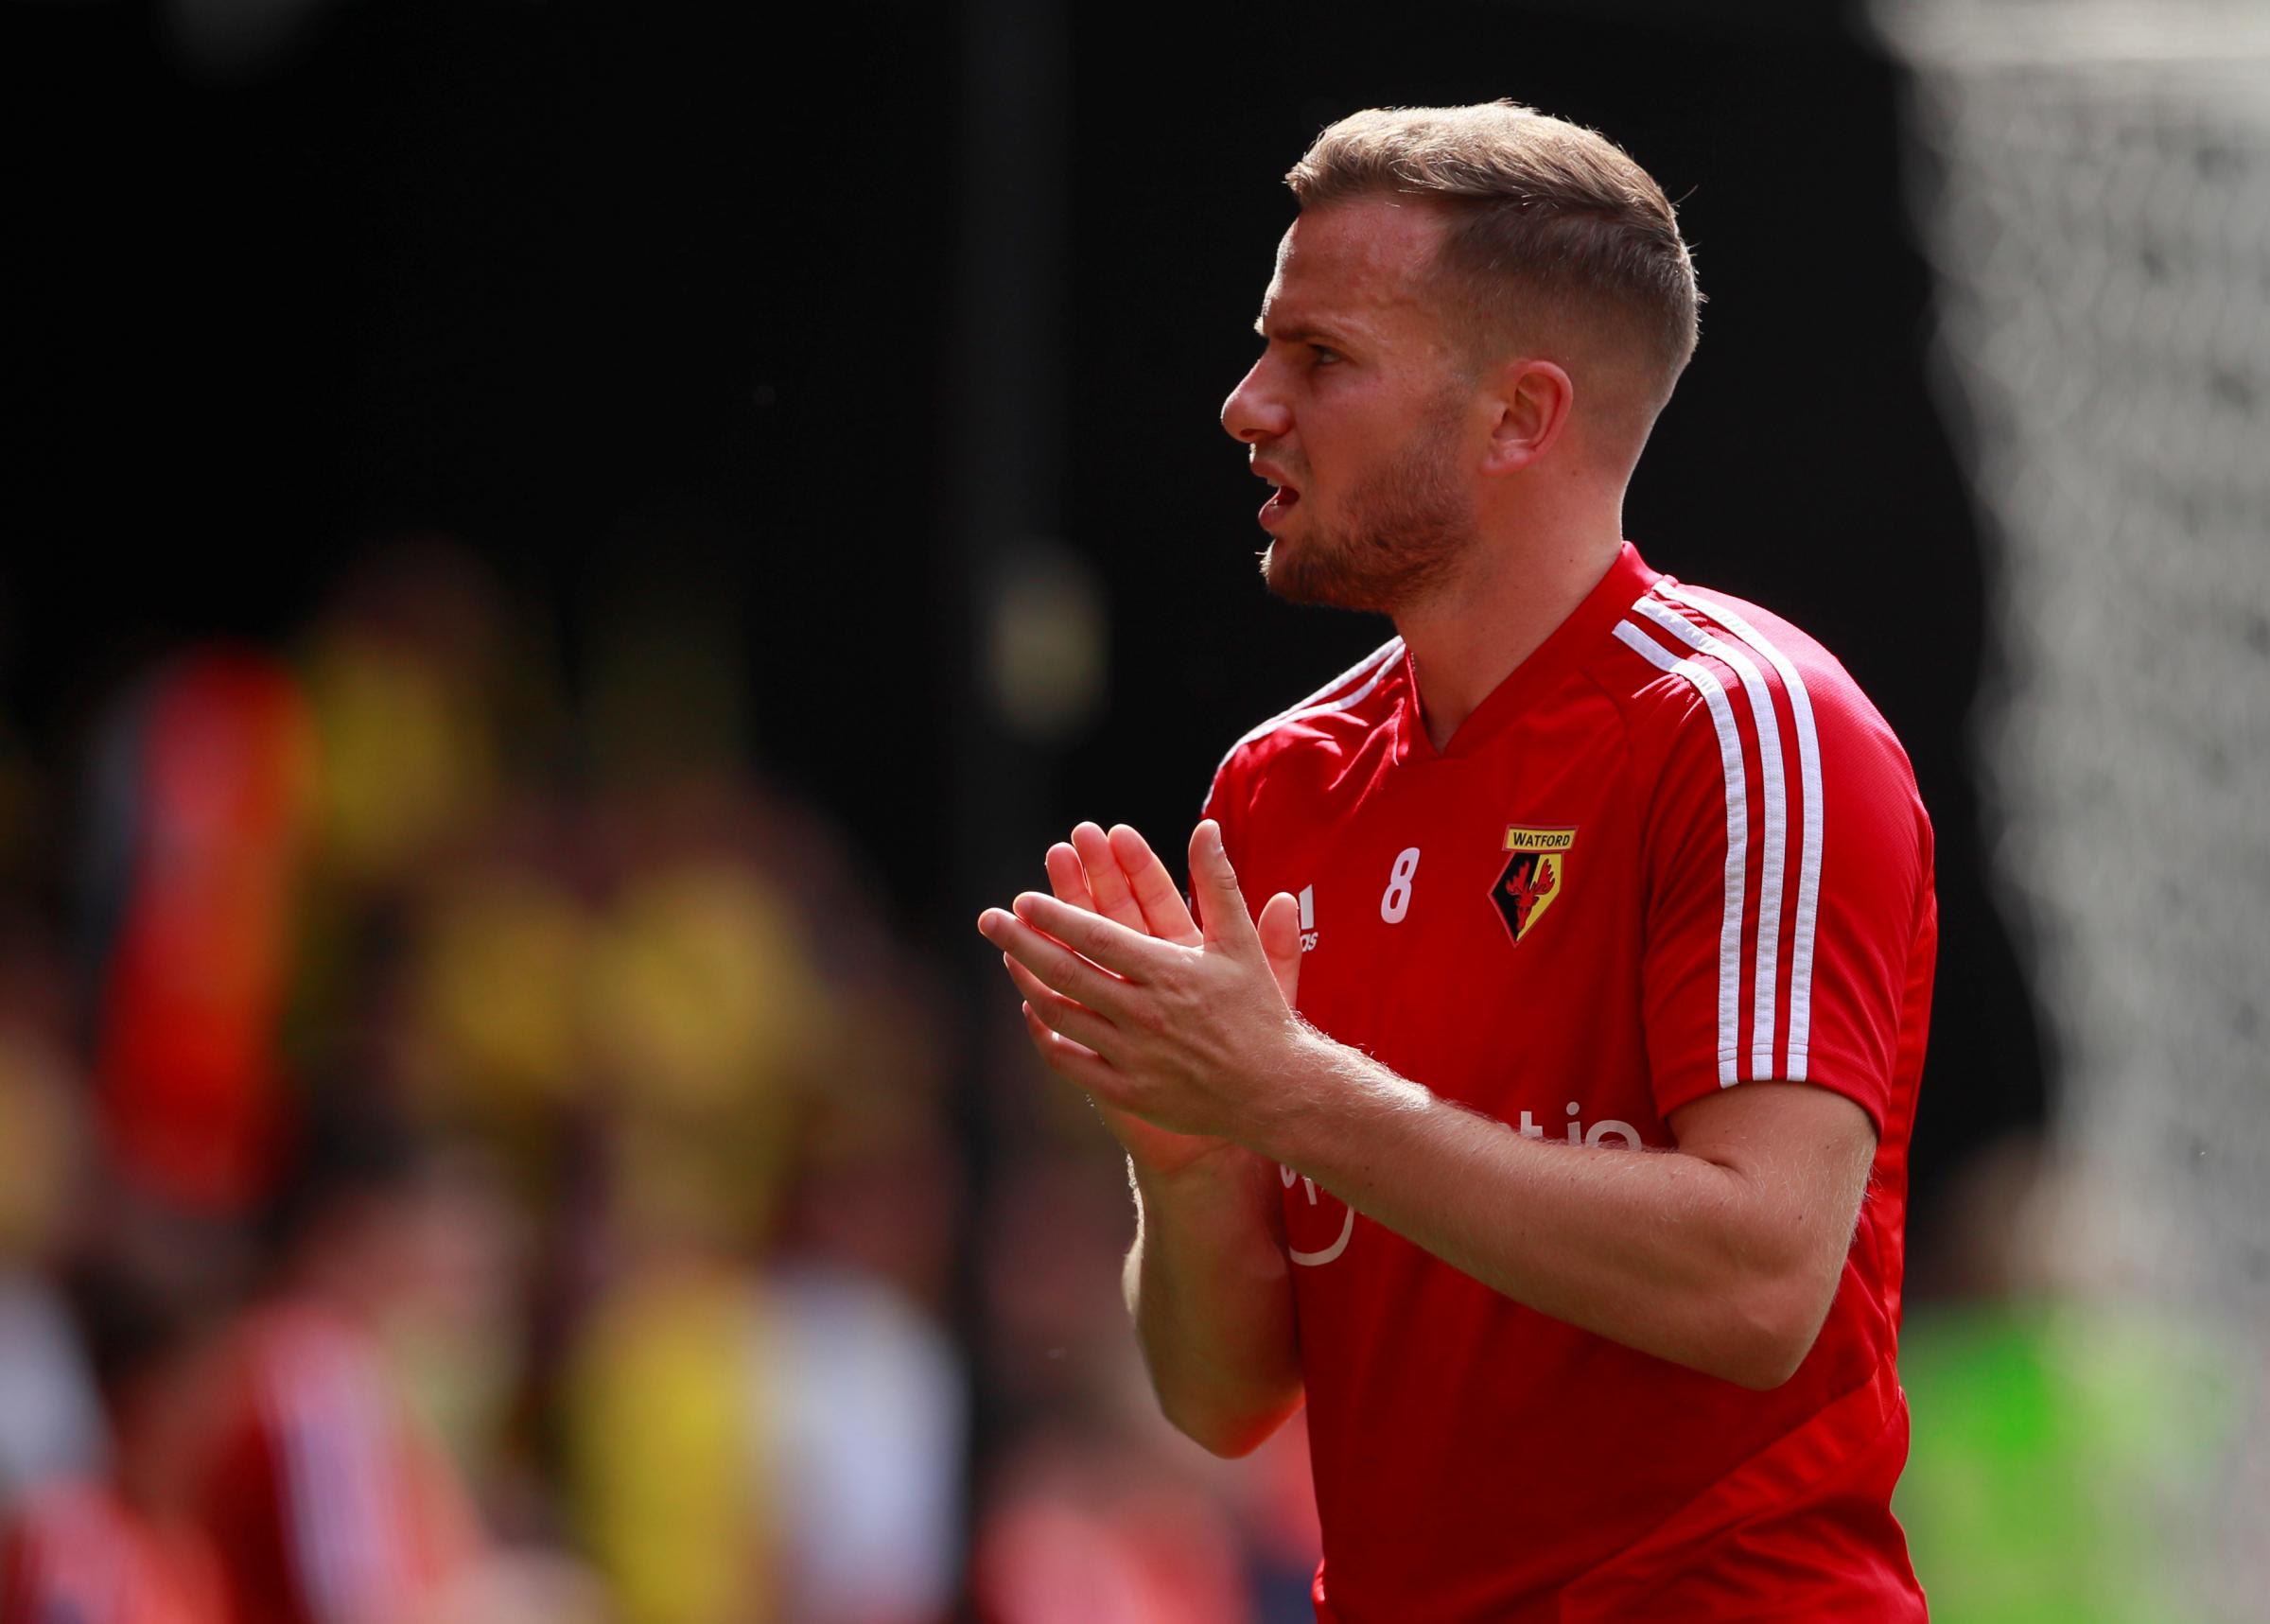 Tom Cleverley wants Watford to adopt a no-excuses mentality once the Premier League resumes